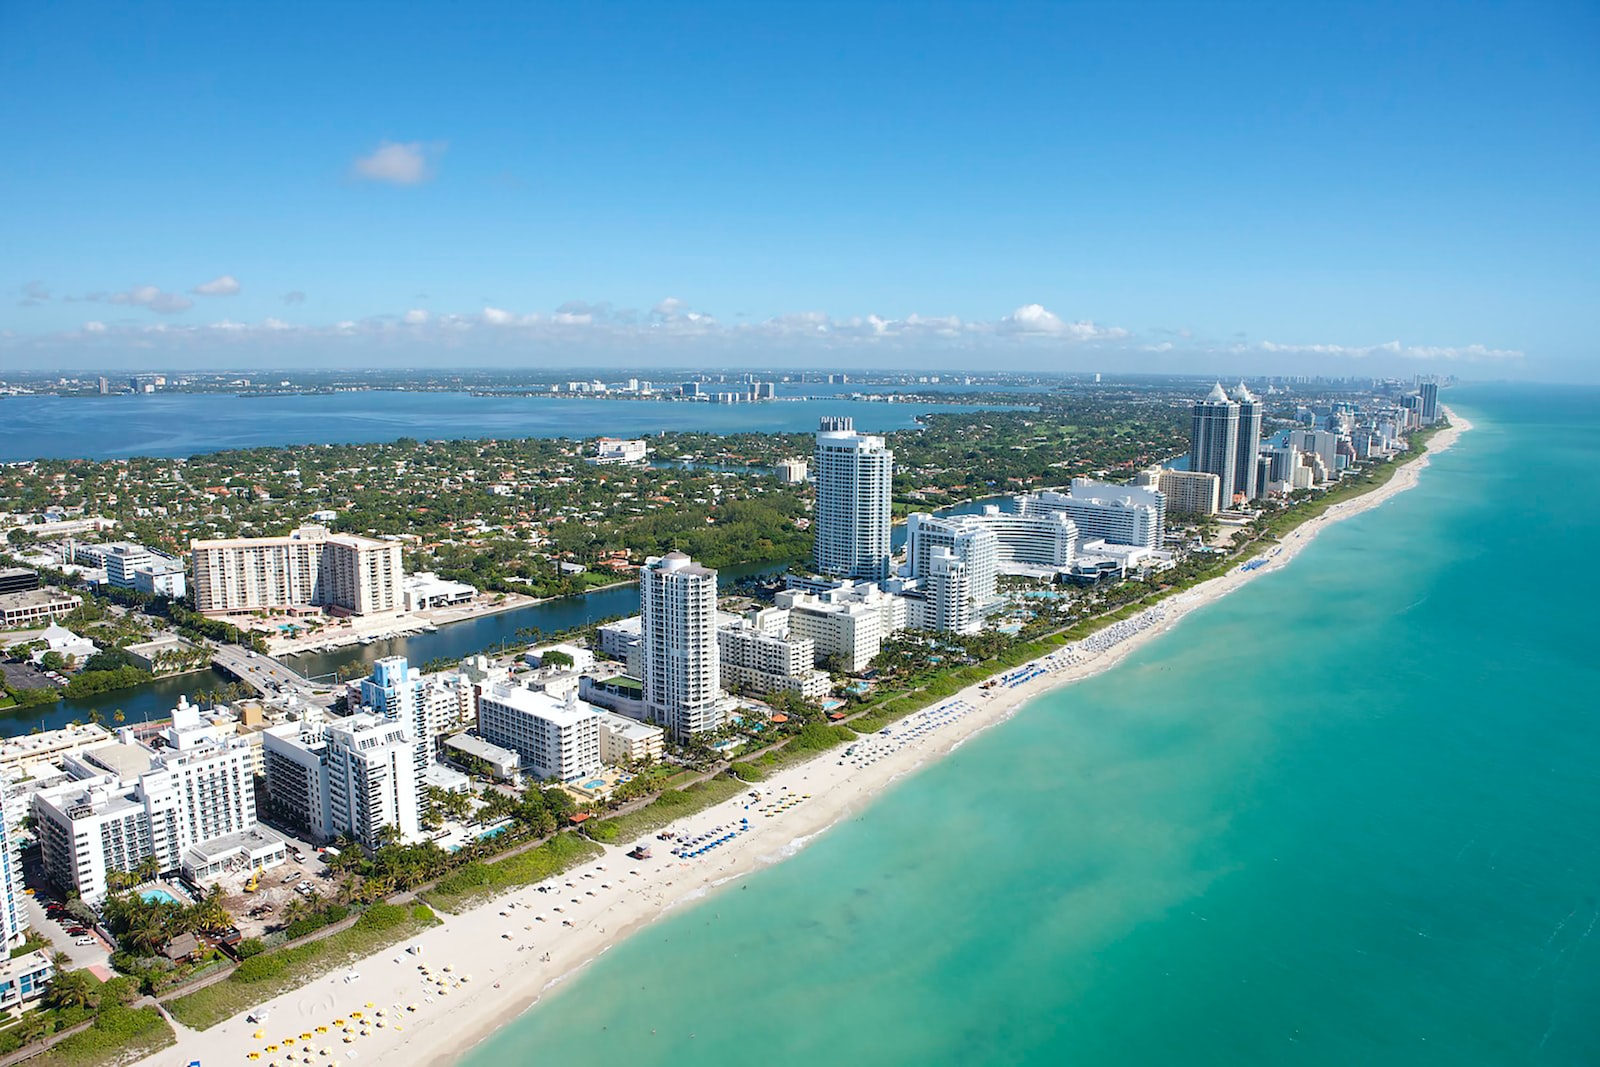 South Florida real estate players gear up for recession Landlords, developers and brokers predict some turbulence as economic slowdown looms